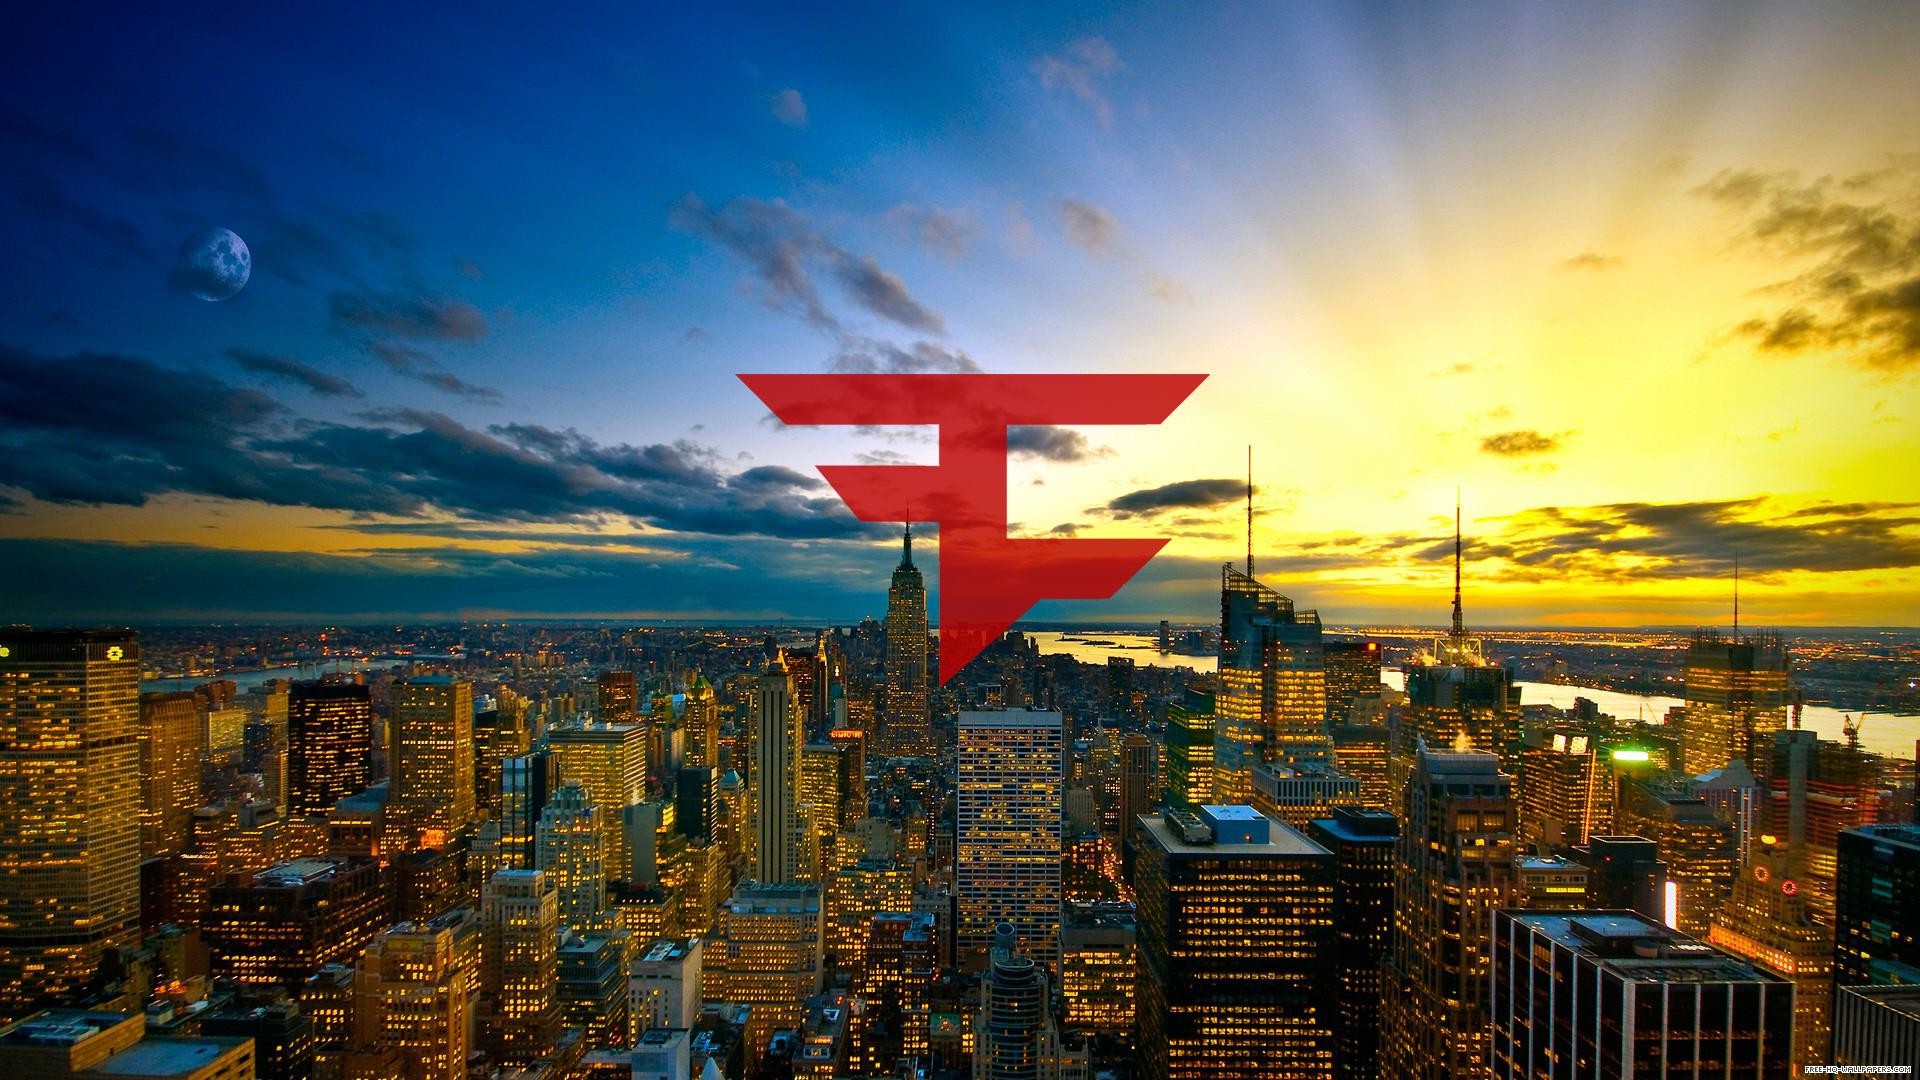 1920x1080 0 Clean FaZe Clan Wallpaper on Behan Competitive Team Wallpapers  CoDCompetiti